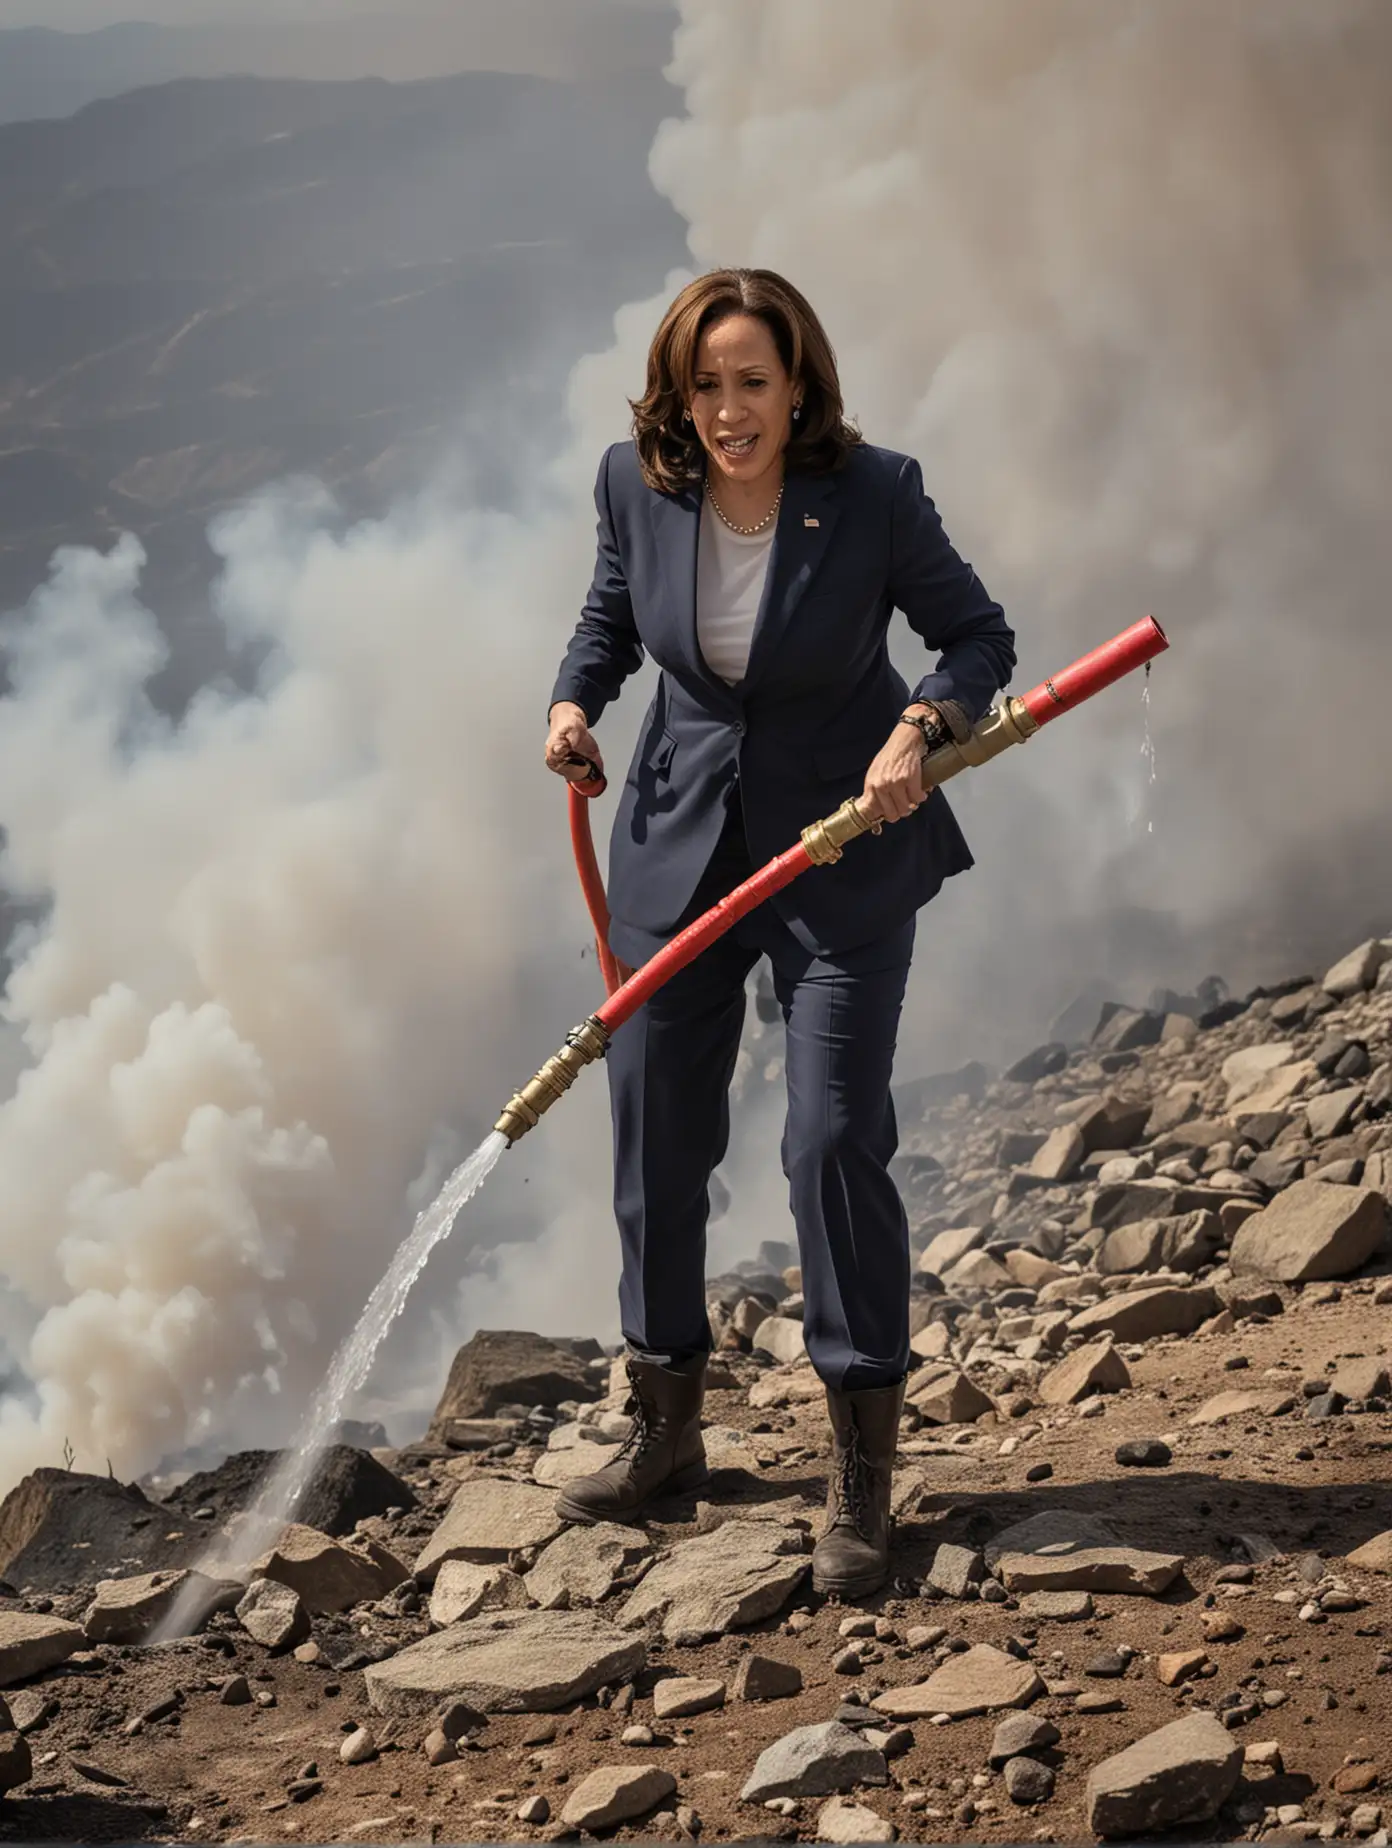 Vice president Kamala Harris, standing on the summit of a mountain, using a fire hose to put out a fire.